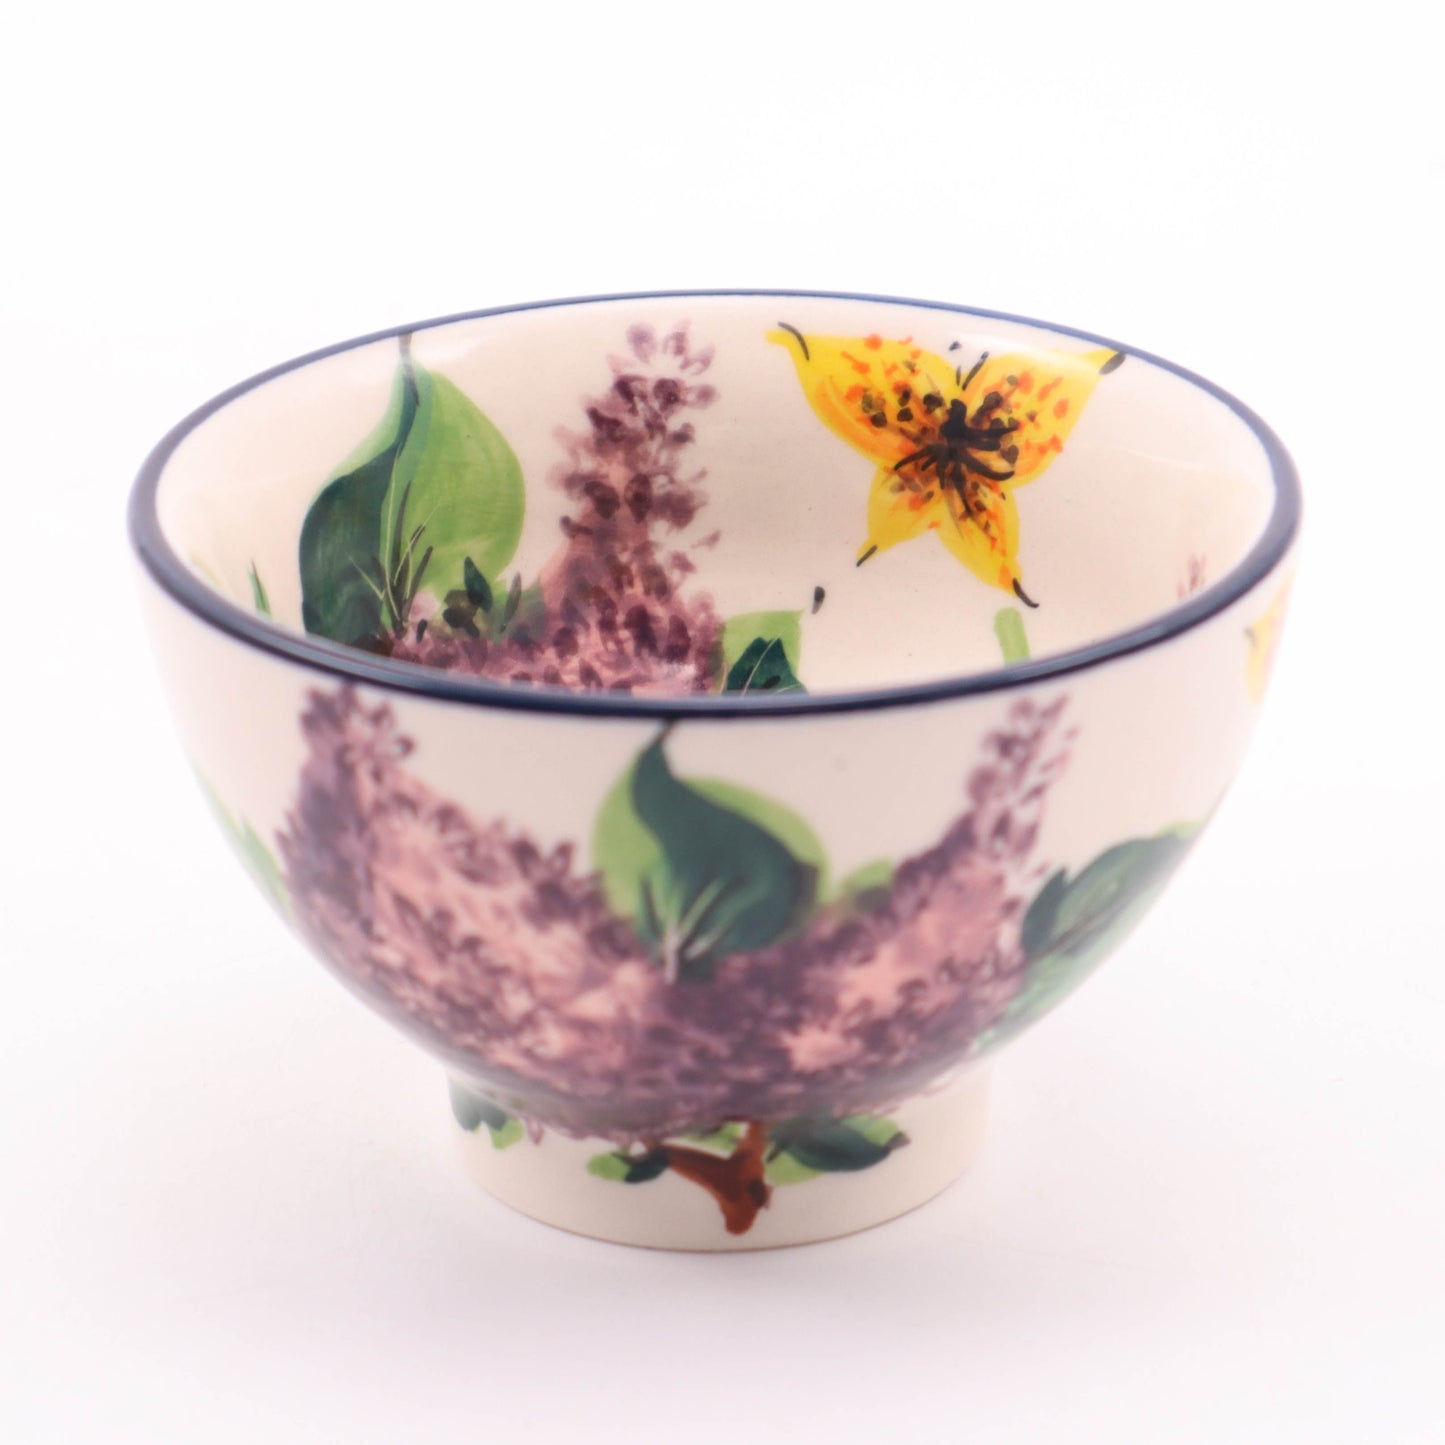 4"x2" Small Ice Cream Bowl. Pattern: Lovely Lilac